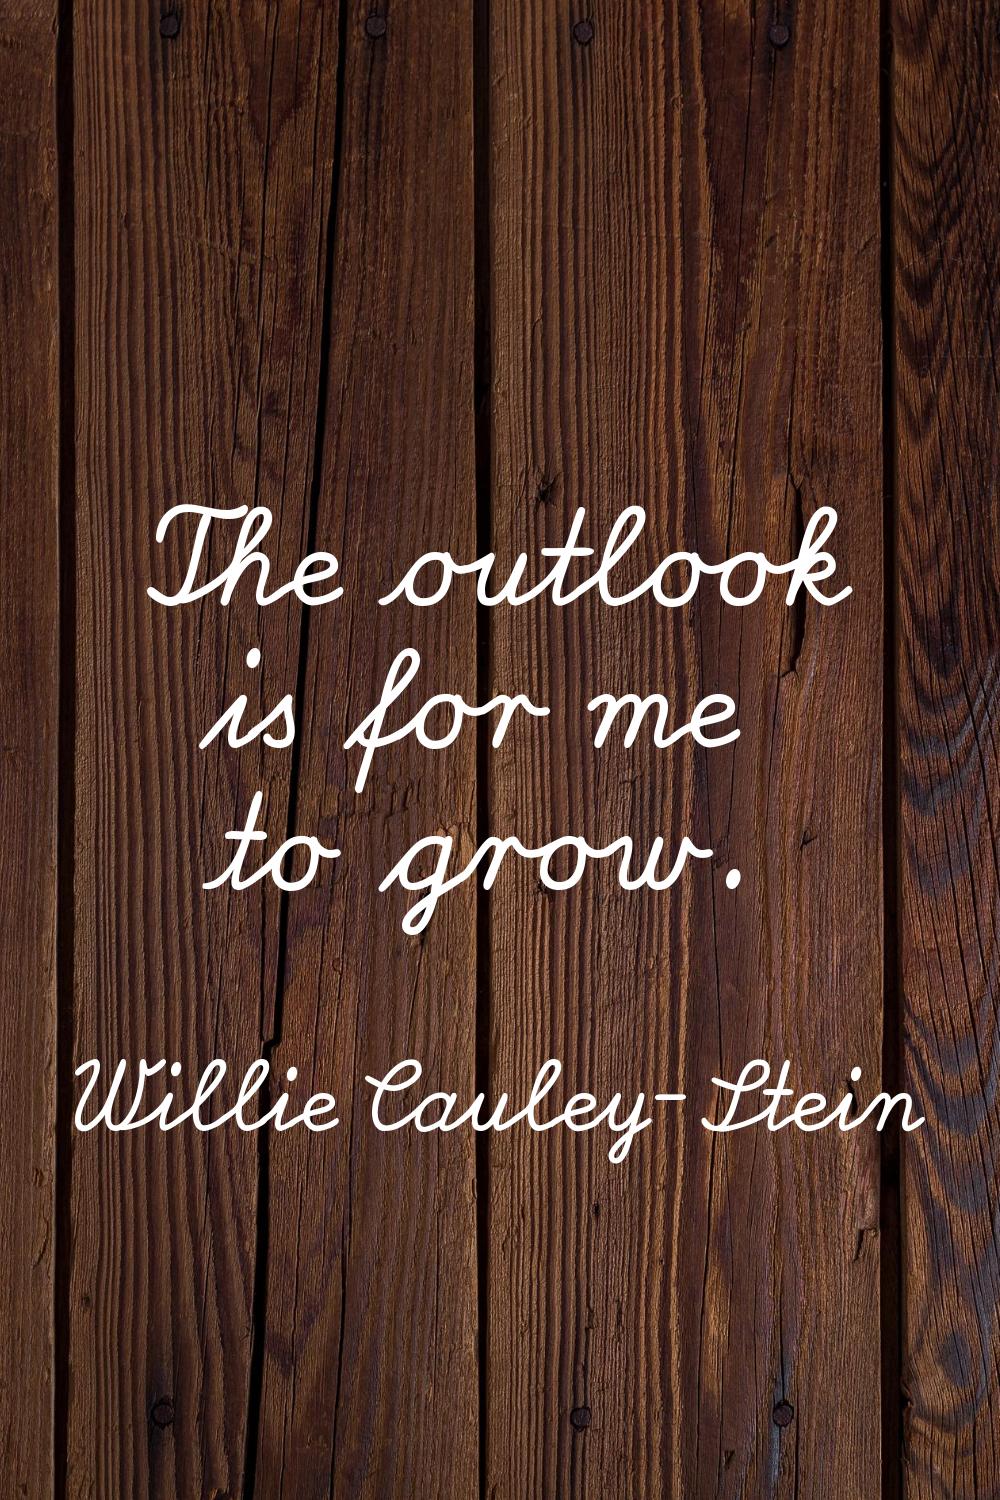 The outlook is for me to grow.